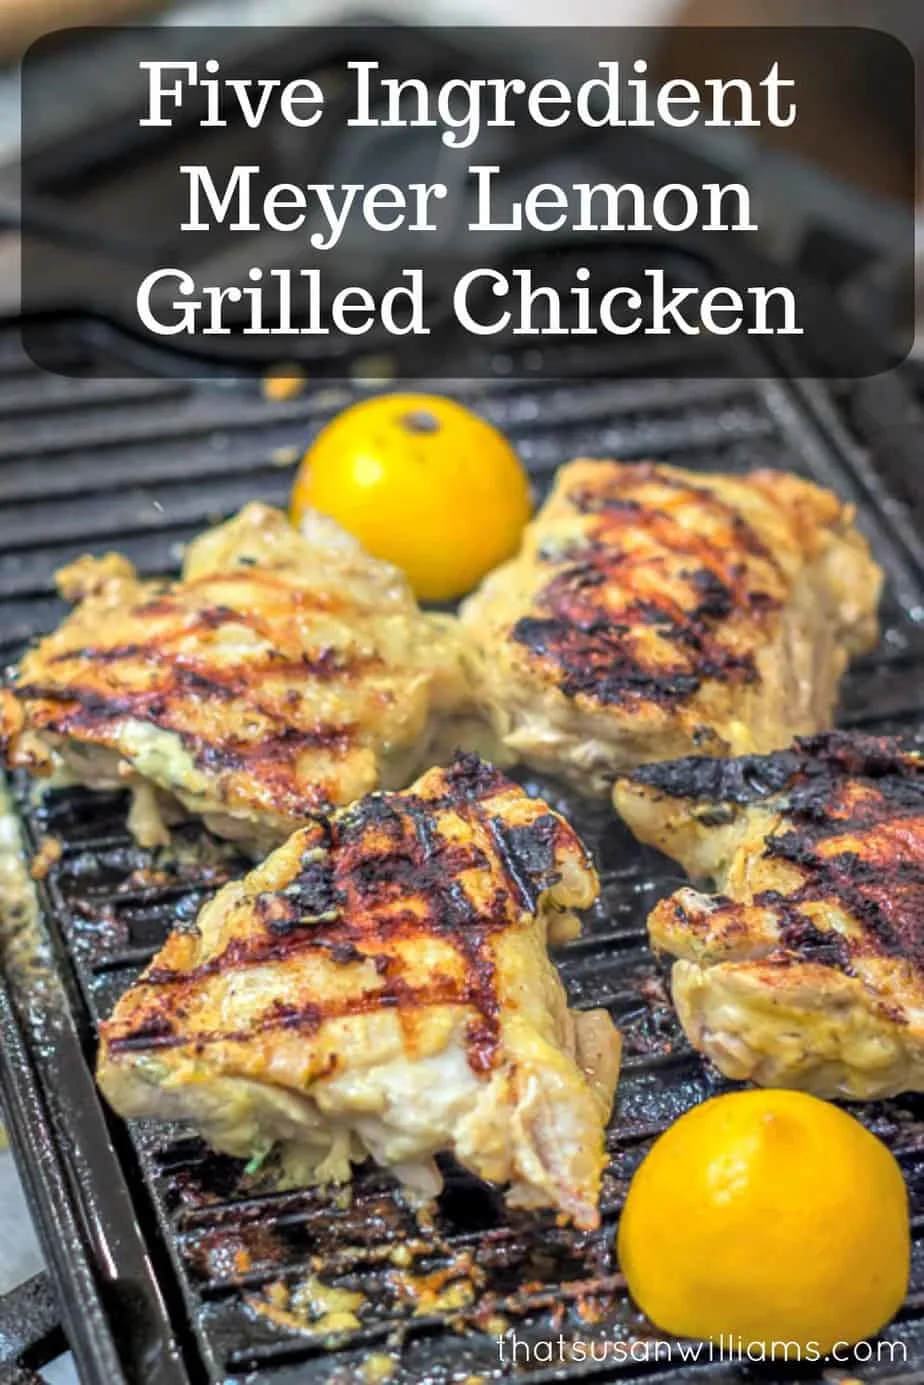 Five Ingredient Meyer Lemon Grilled Chicken is a delicious and easy weeknight meal. #chicken #grilledchicken #easy #weeknightmeal